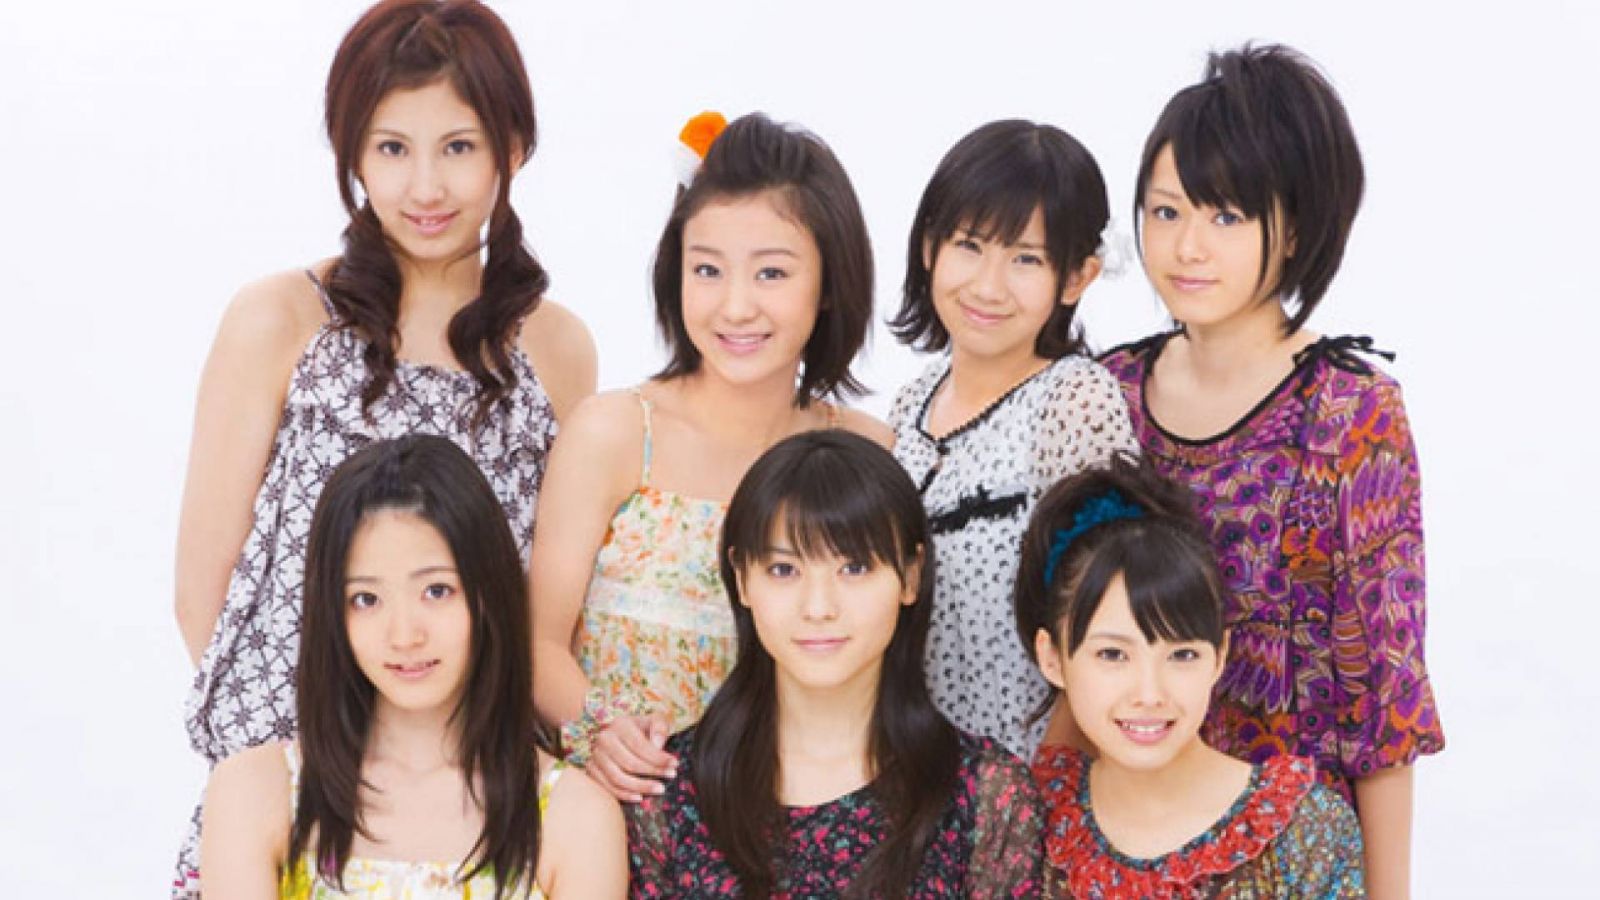 Umeda Erika To Graduate From °C-ute © JapanFiles.com / Up Front Agency